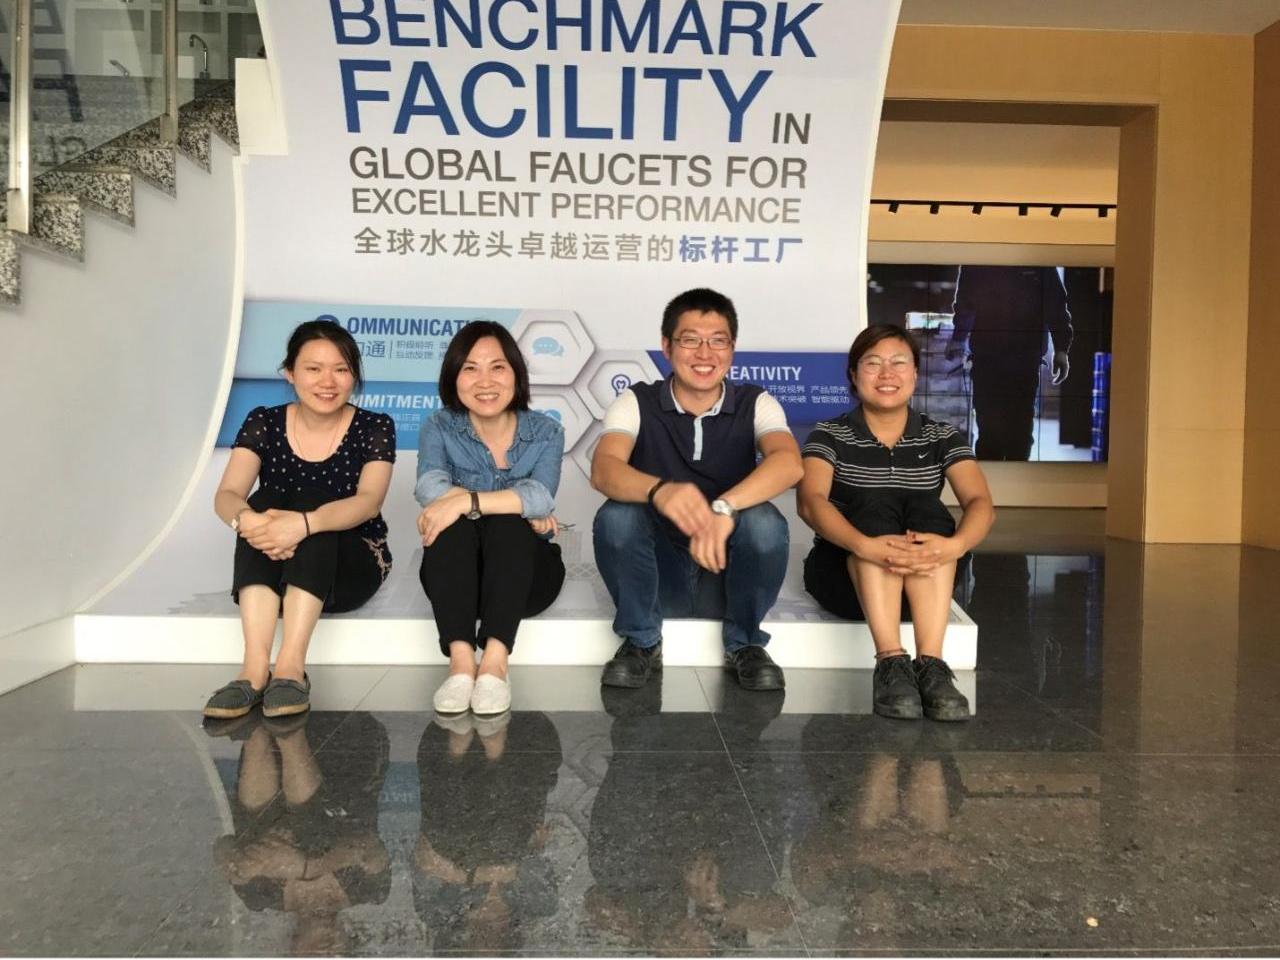 Four people seated in front of a sign "Benchmark facility in global faucets for excellent performance."